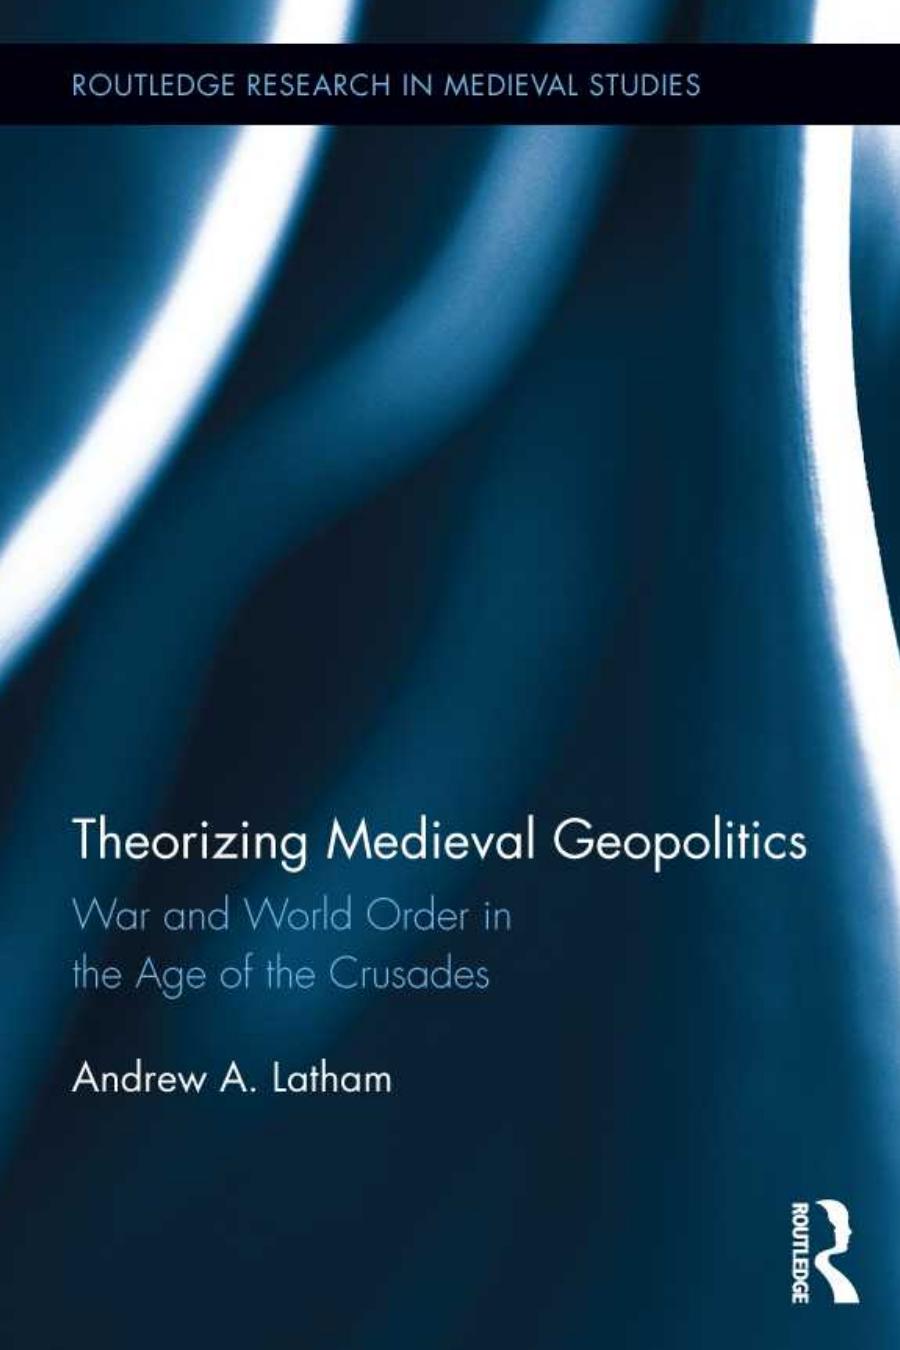 Theorizing Medieval Geopolitics: War and World Order in the Age of the Crusades